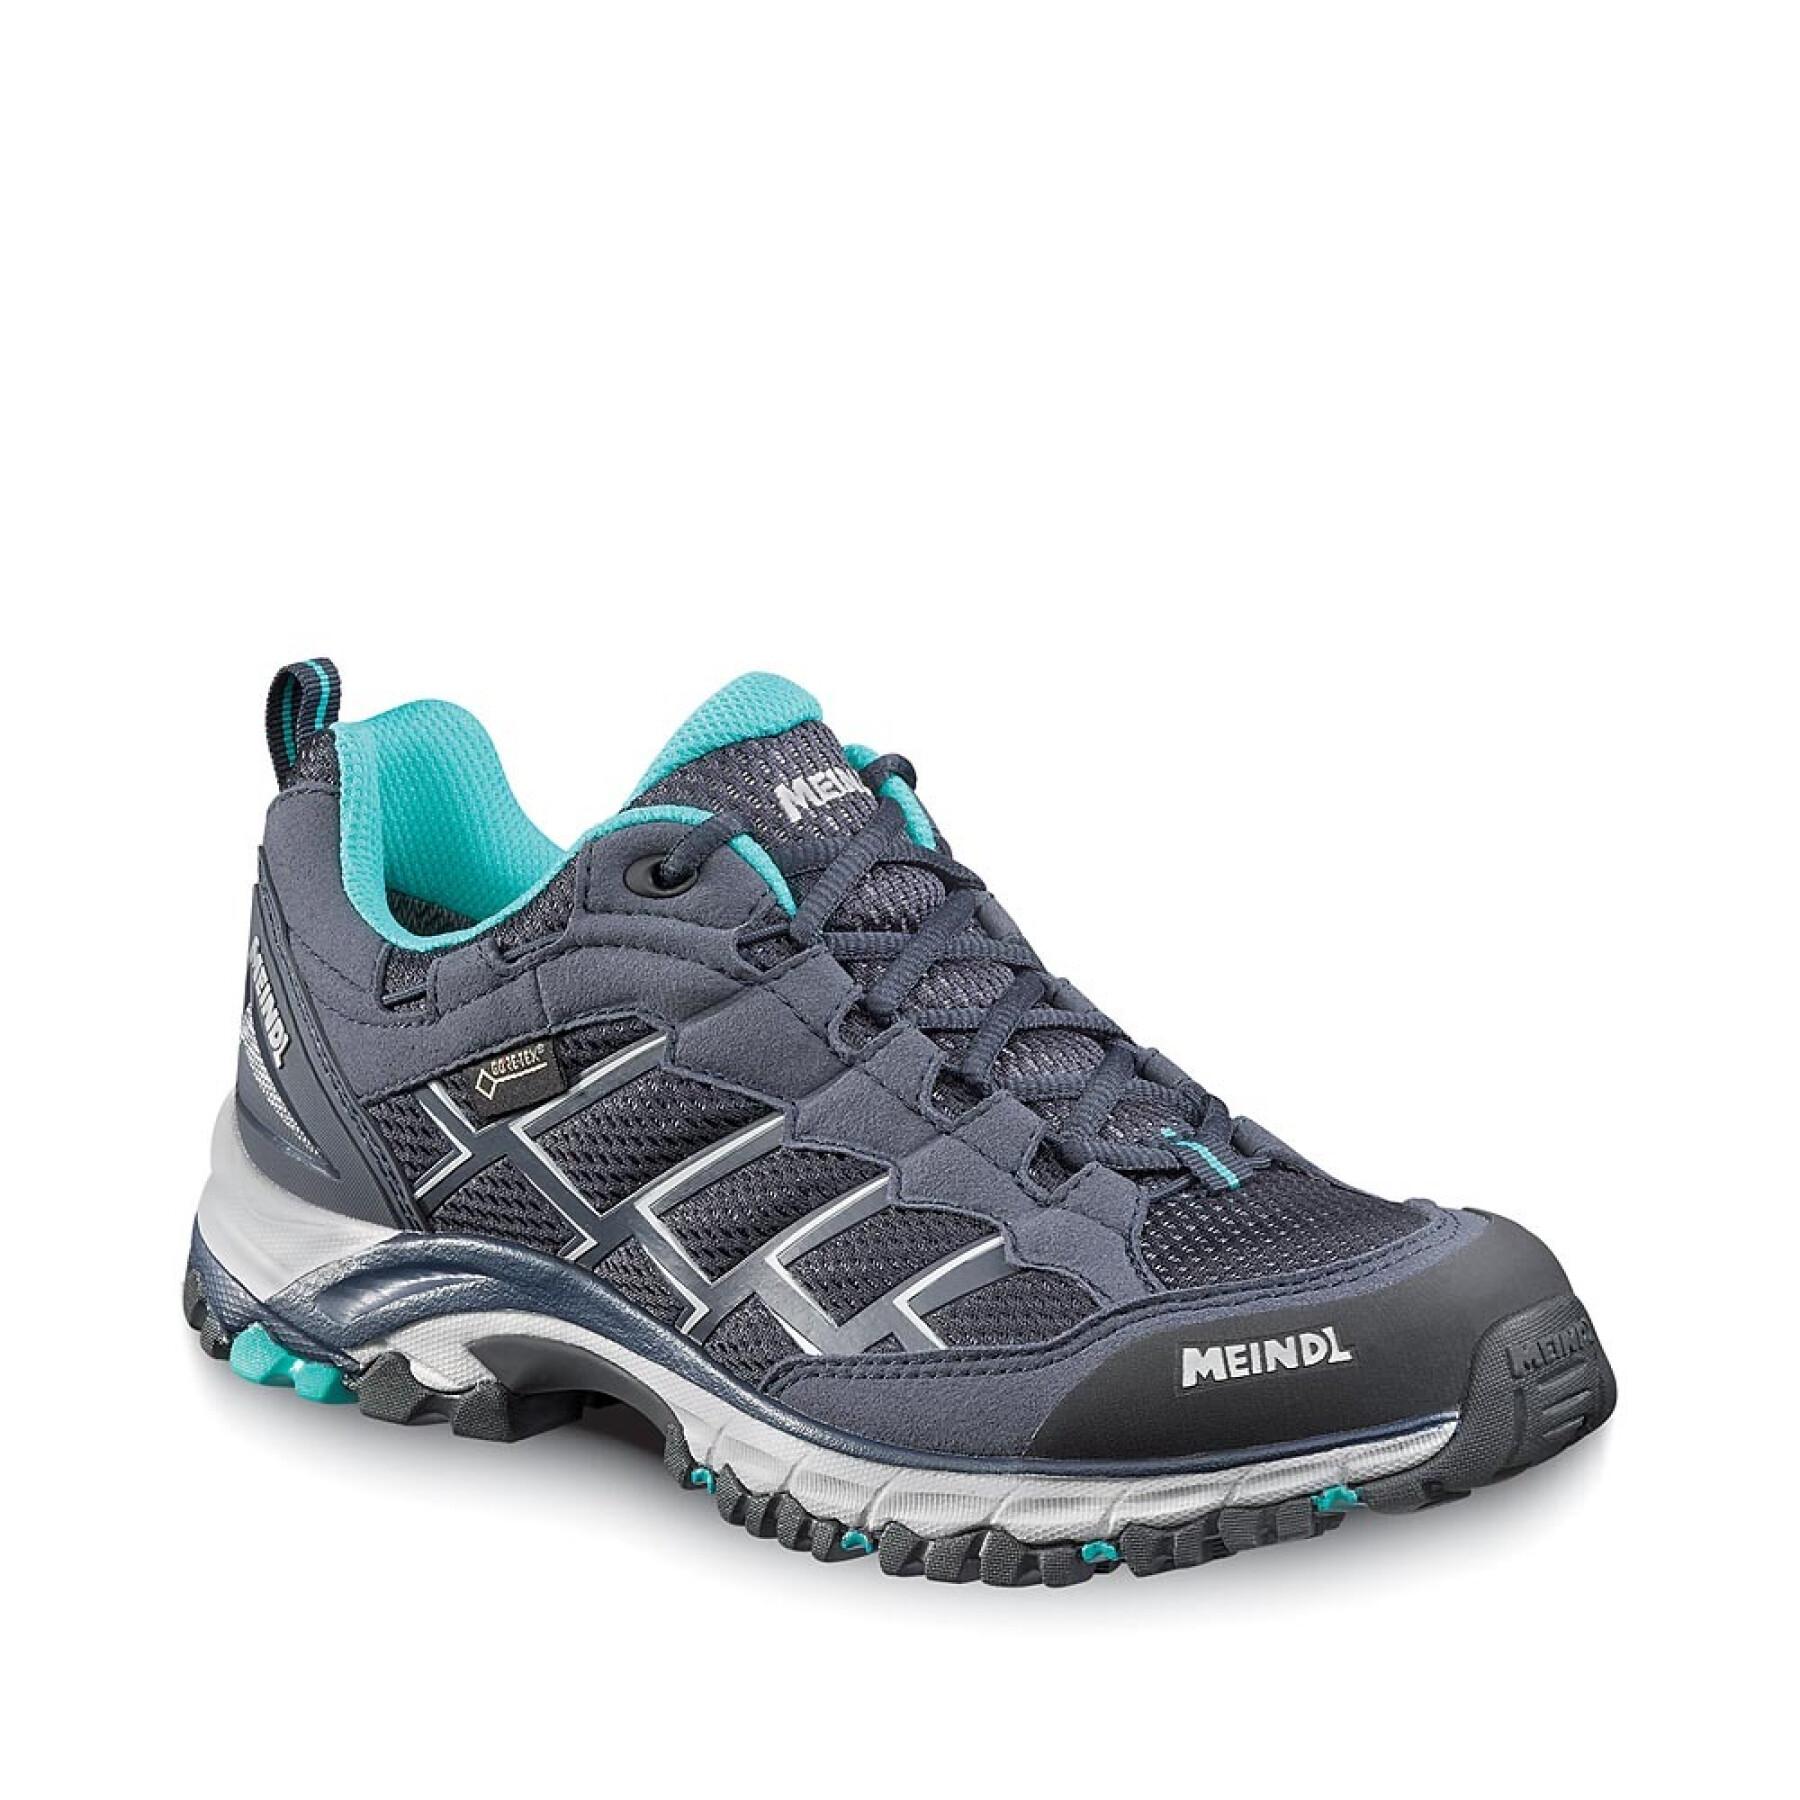 Women's hiking shoes Meindl Caribe Lady GTX